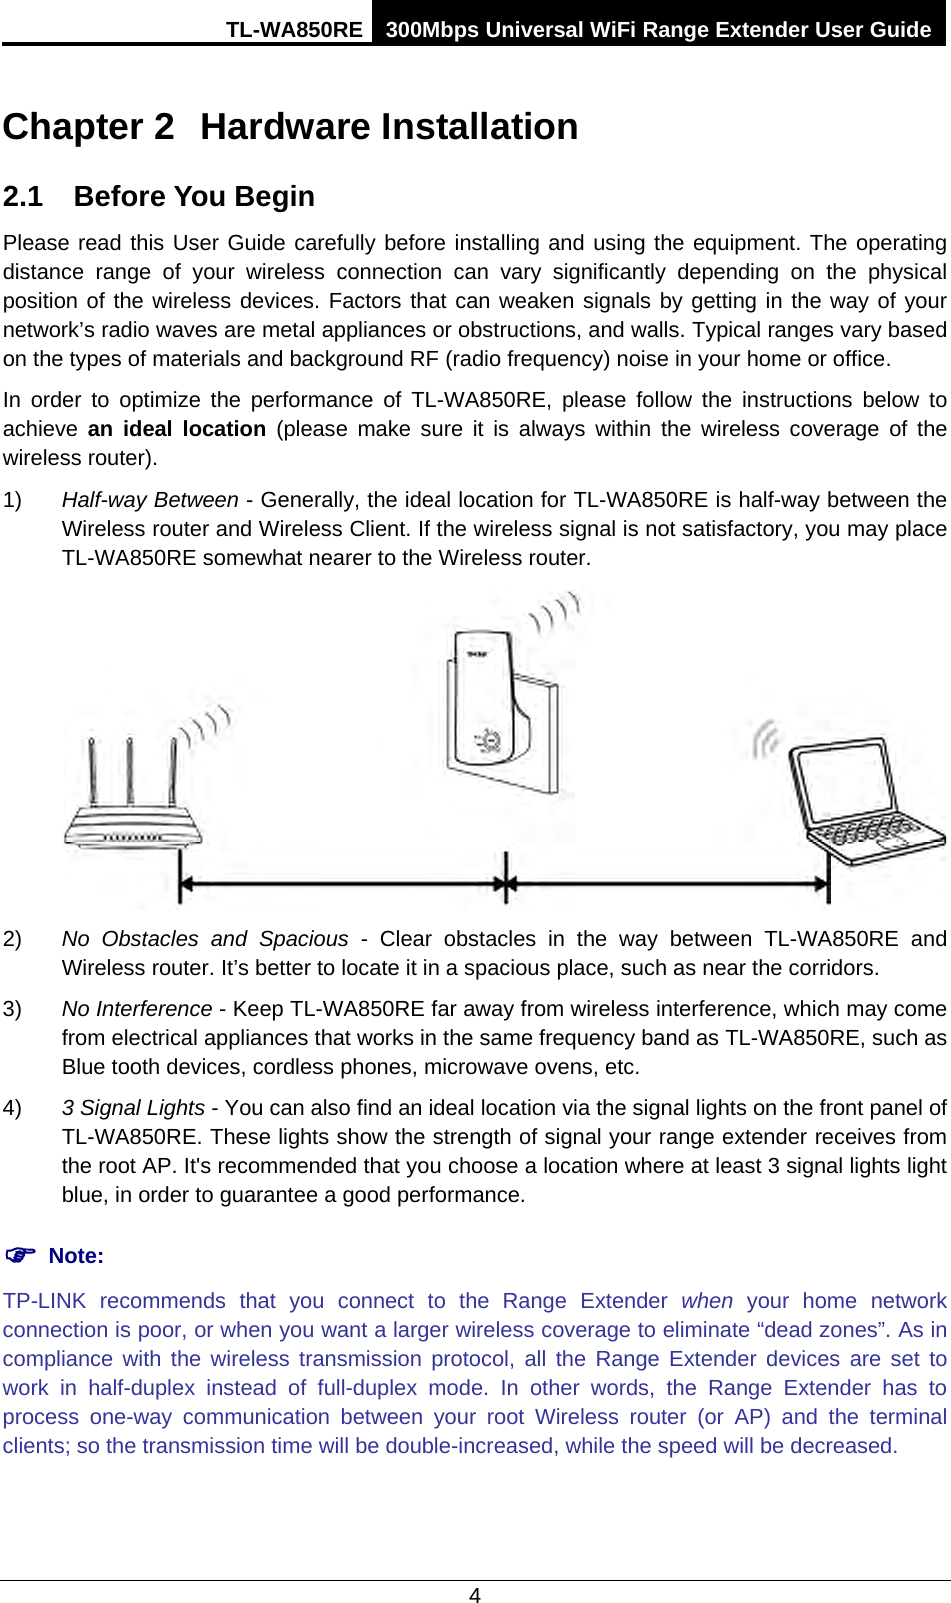 TL-WA850RE 300Mbps Universal WiFi Range Extender User Guide  4 Chapter 2 Hardware Installation 2.1 Before You Begin Please read this User Guide carefully before installing and using the equipment. The operating distance range of your wireless connection can vary significantly depending on the physical position of the wireless devices. Factors that can weaken signals by getting in the way of your network’s radio waves are metal appliances or obstructions, and walls. Typical ranges vary based on the types of materials and background RF (radio frequency) noise in your home or office. In order to optimize the performance of TL-WA850RE, please follow the instructions below to achieve  an ideal location (please make sure it is always within the wireless coverage of the wireless router). 1) Half-way Between - Generally, the ideal location for TL-WA850RE is half-way between the Wireless router and Wireless Client. If the wireless signal is not satisfactory, you may place TL-WA850RE somewhat nearer to the Wireless router.  2) No Obstacles and Spacious - Clear  obstacles in the way between TL-WA850RE and Wireless router. It’s better to locate it in a spacious place, such as near the corridors.   3) No Interference - Keep TL-WA850RE far away from wireless interference, which may come from electrical appliances that works in the same frequency band as TL-WA850RE, such as Blue tooth devices, cordless phones, microwave ovens, etc. 4) 3 Signal Lights - You can also find an ideal location via the signal lights on the front panel of TL-WA850RE. These lights show the strength of signal your range extender receives from the root AP. It&apos;s recommended that you choose a location where at least 3 signal lights light blue, in order to guarantee a good performance.        Note: TP-LINK  recommends that you connect to the Range Extender when your home network connection is poor, or when you want a larger wireless coverage to eliminate “dead zones”. As in compliance with the wireless transmission protocol, all the Range Extender devices are set to work in half-duplex instead of full-duplex mode. In other words, the Range Extender has to process one-way communication between your root Wireless router (or AP) and the terminal clients; so the transmission time will be double-increased, while the speed will be decreased.   